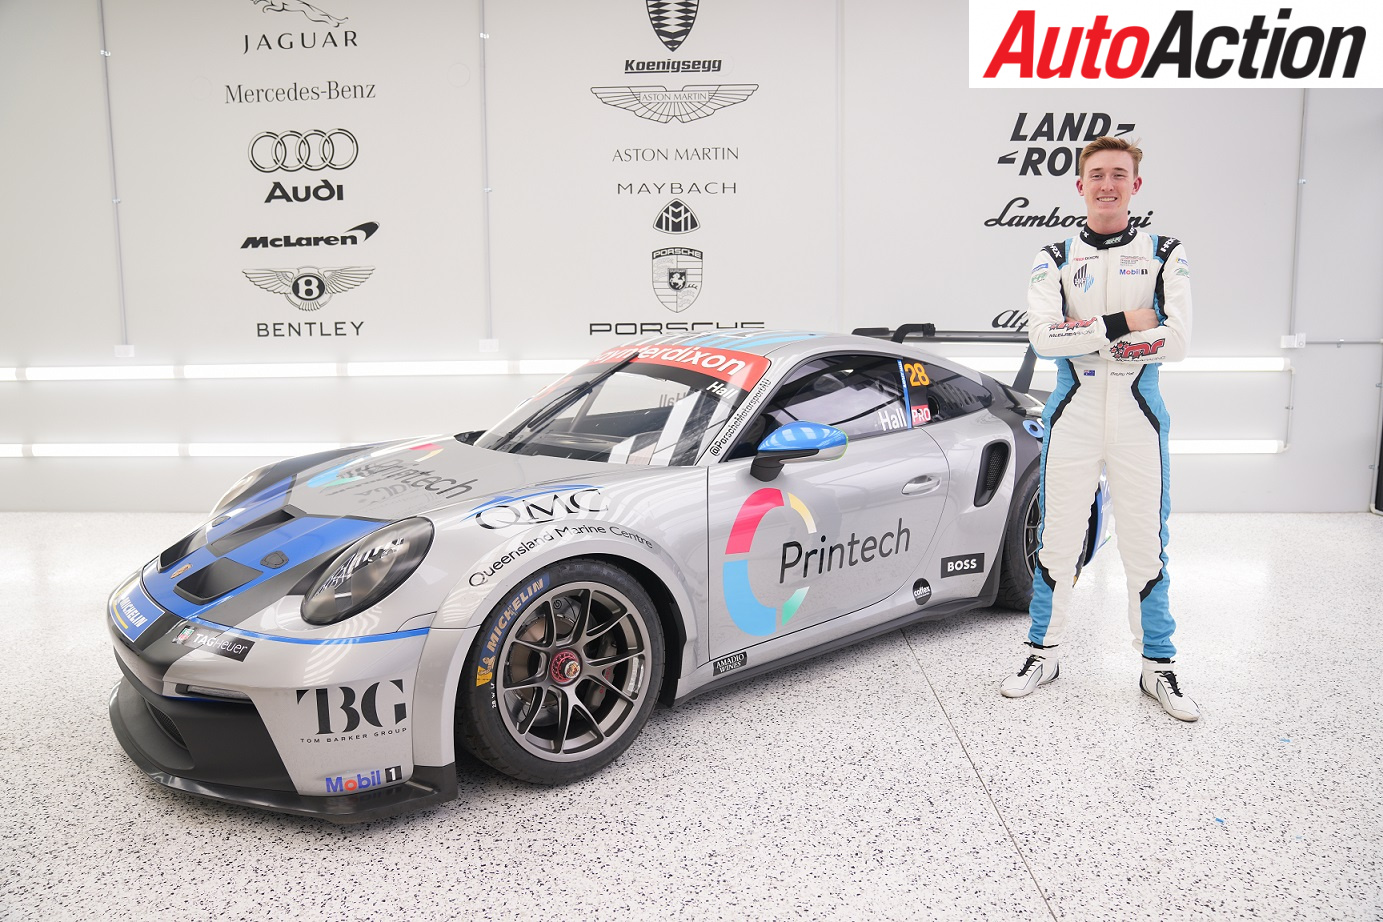 HALL ANNOUNCES PRINTECH BACKING FOR CARRERA CUP DEBUT